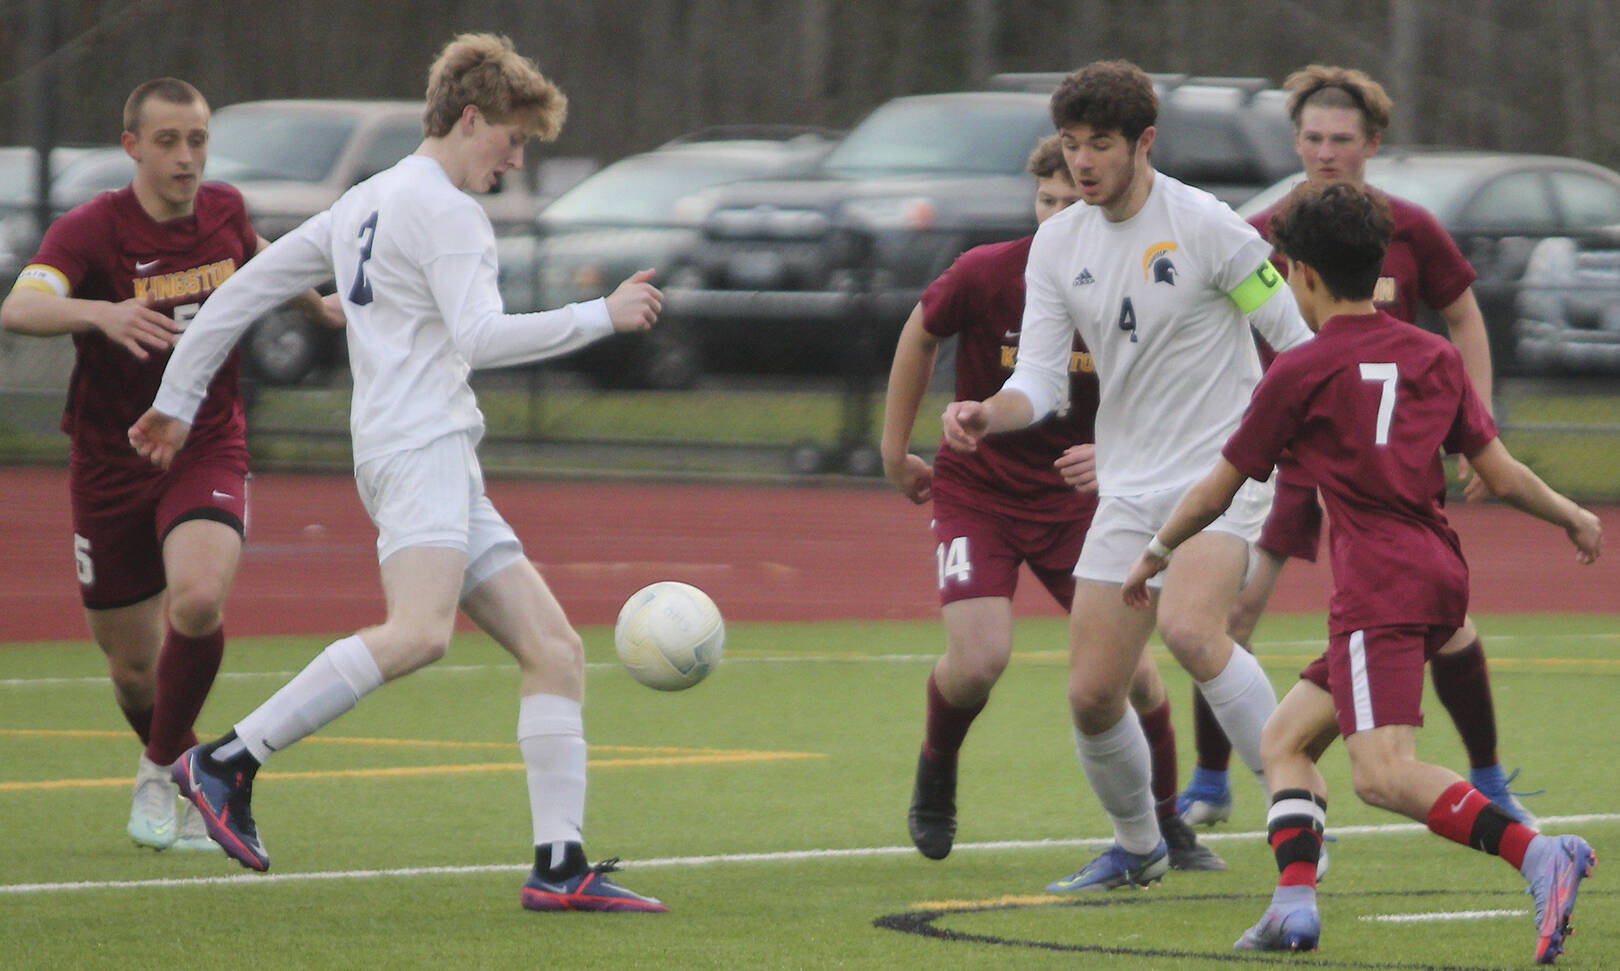 The Bainbridge High School soccer team continues to win and stay atop  the Olympic League standings. Steve Powell/Bainbridge Island Review